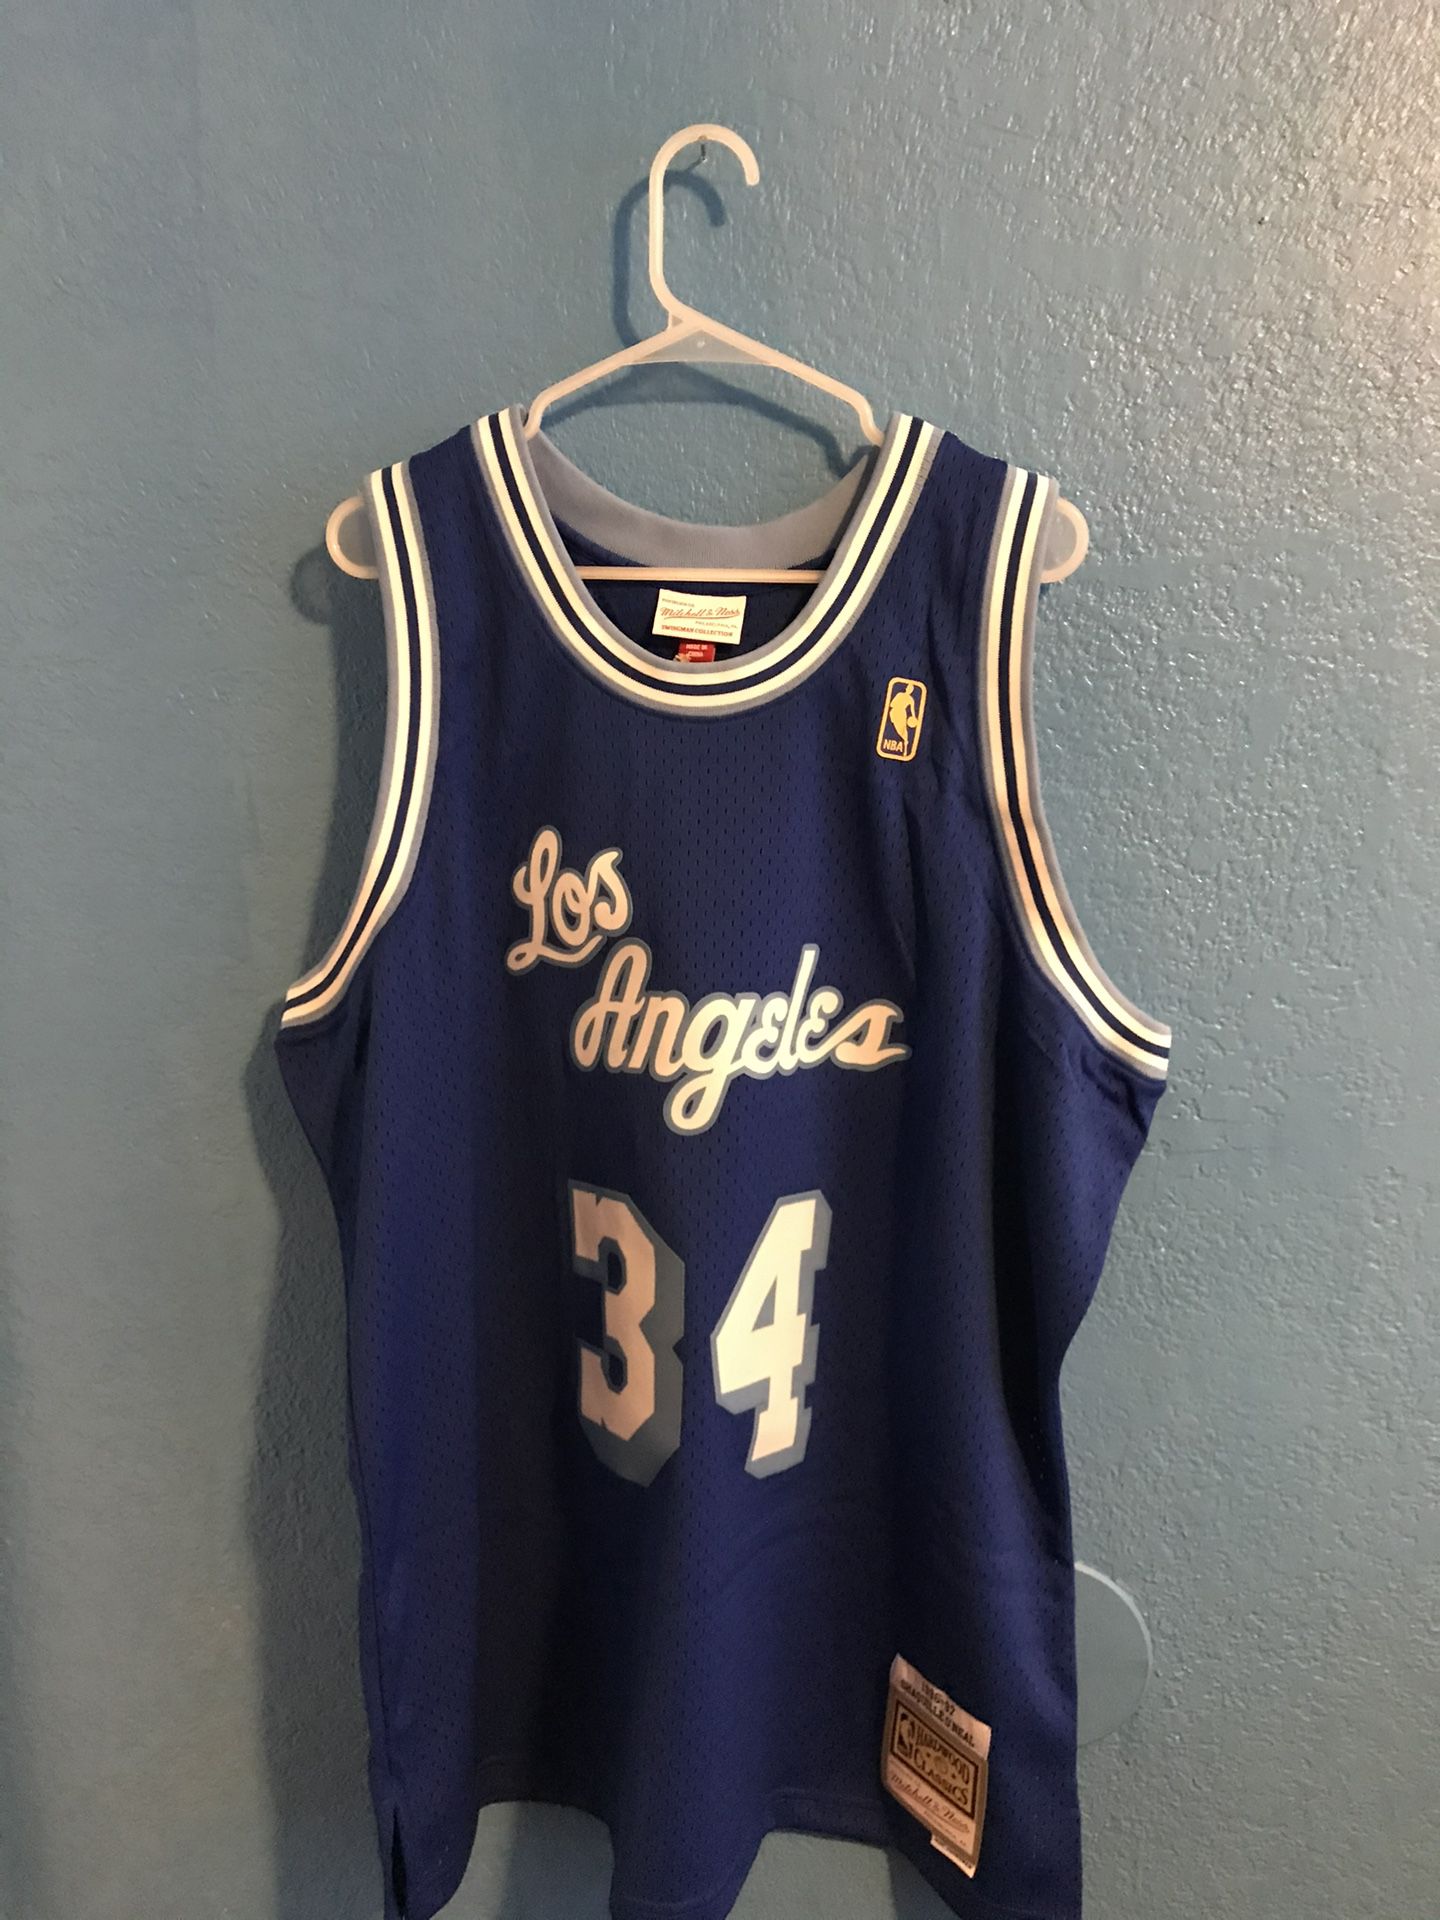 Retro Throwback Shaquille O'Neal Orlando Magic Basketball Jersey for Sale  in Mesa, AZ - OfferUp